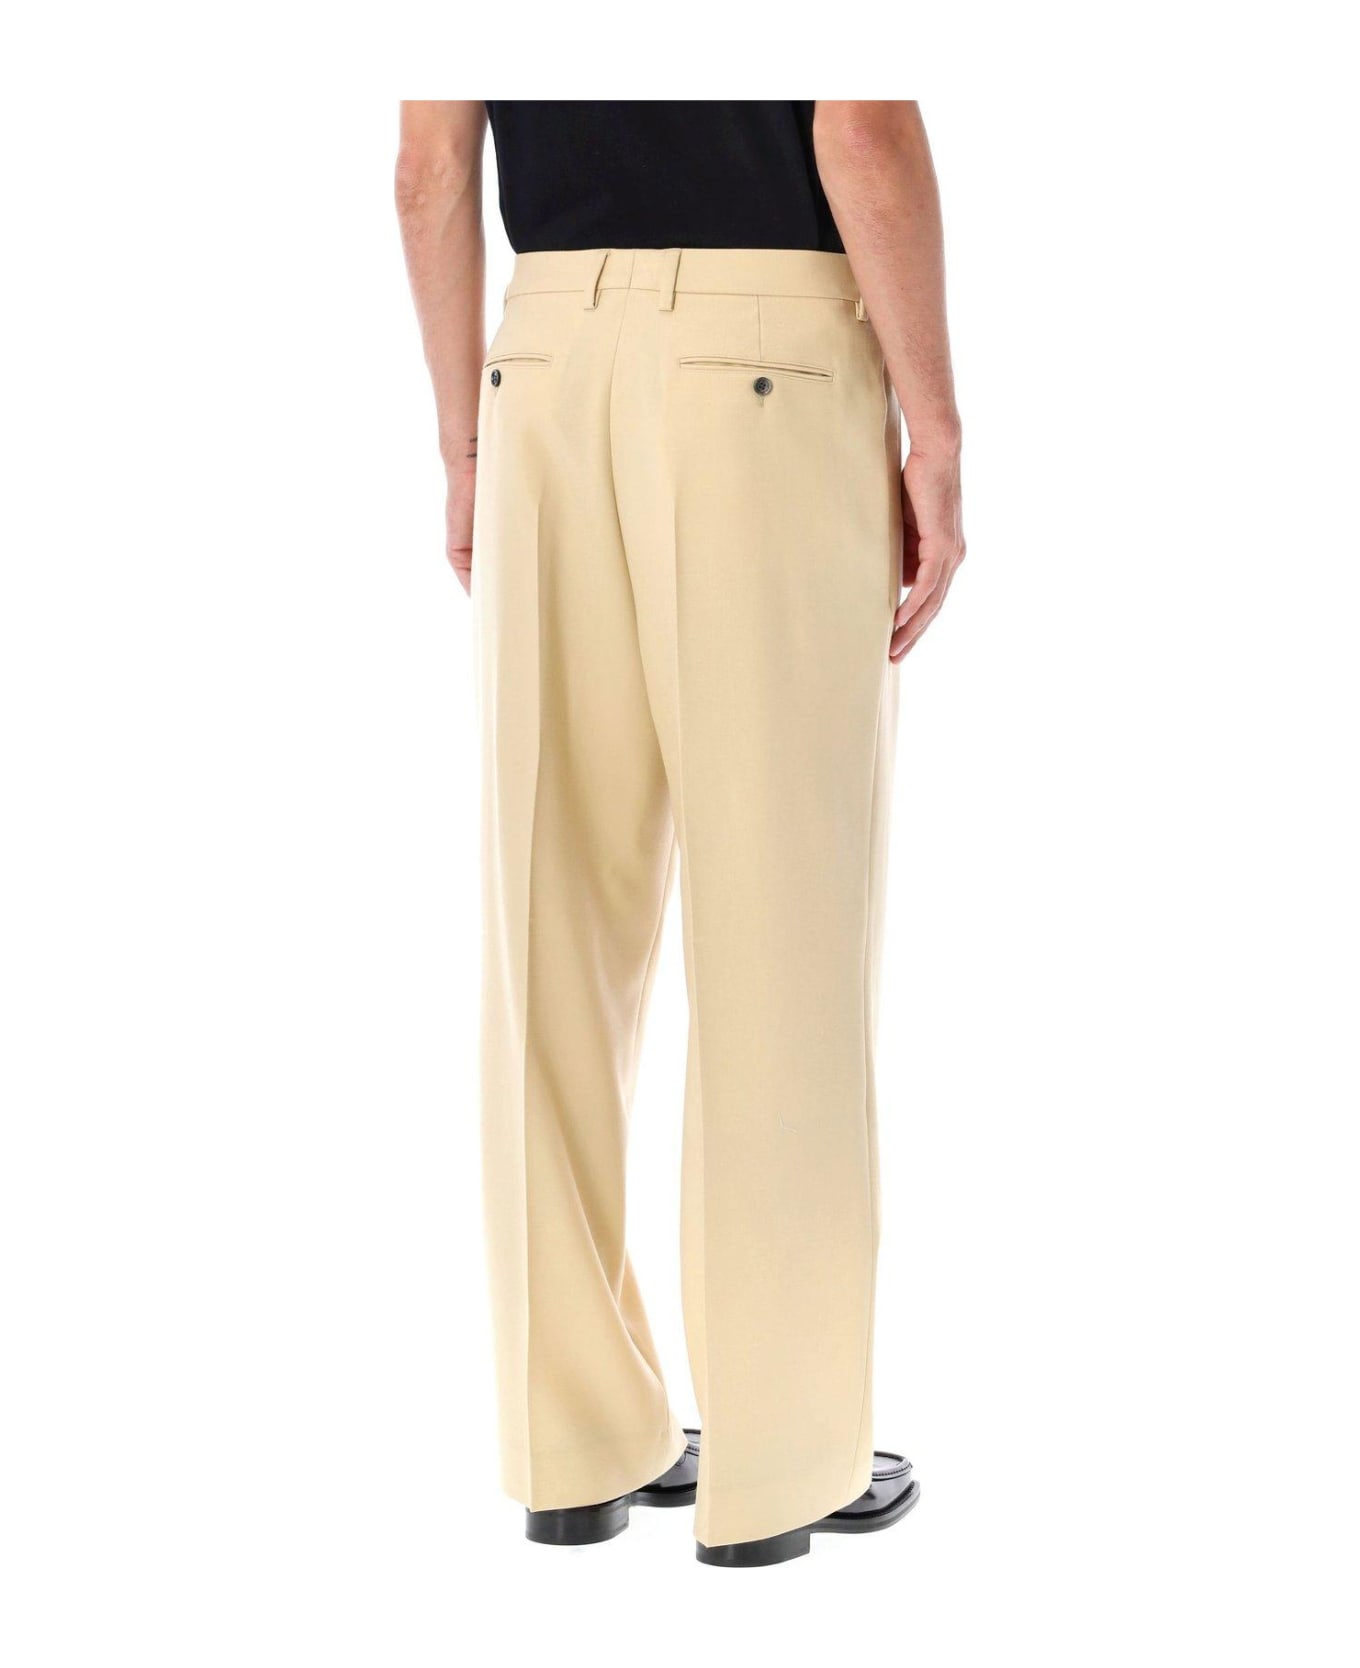 Ami Alexandre Mattiussi Flared Straight Fit Trousers - IVORY ボトムス